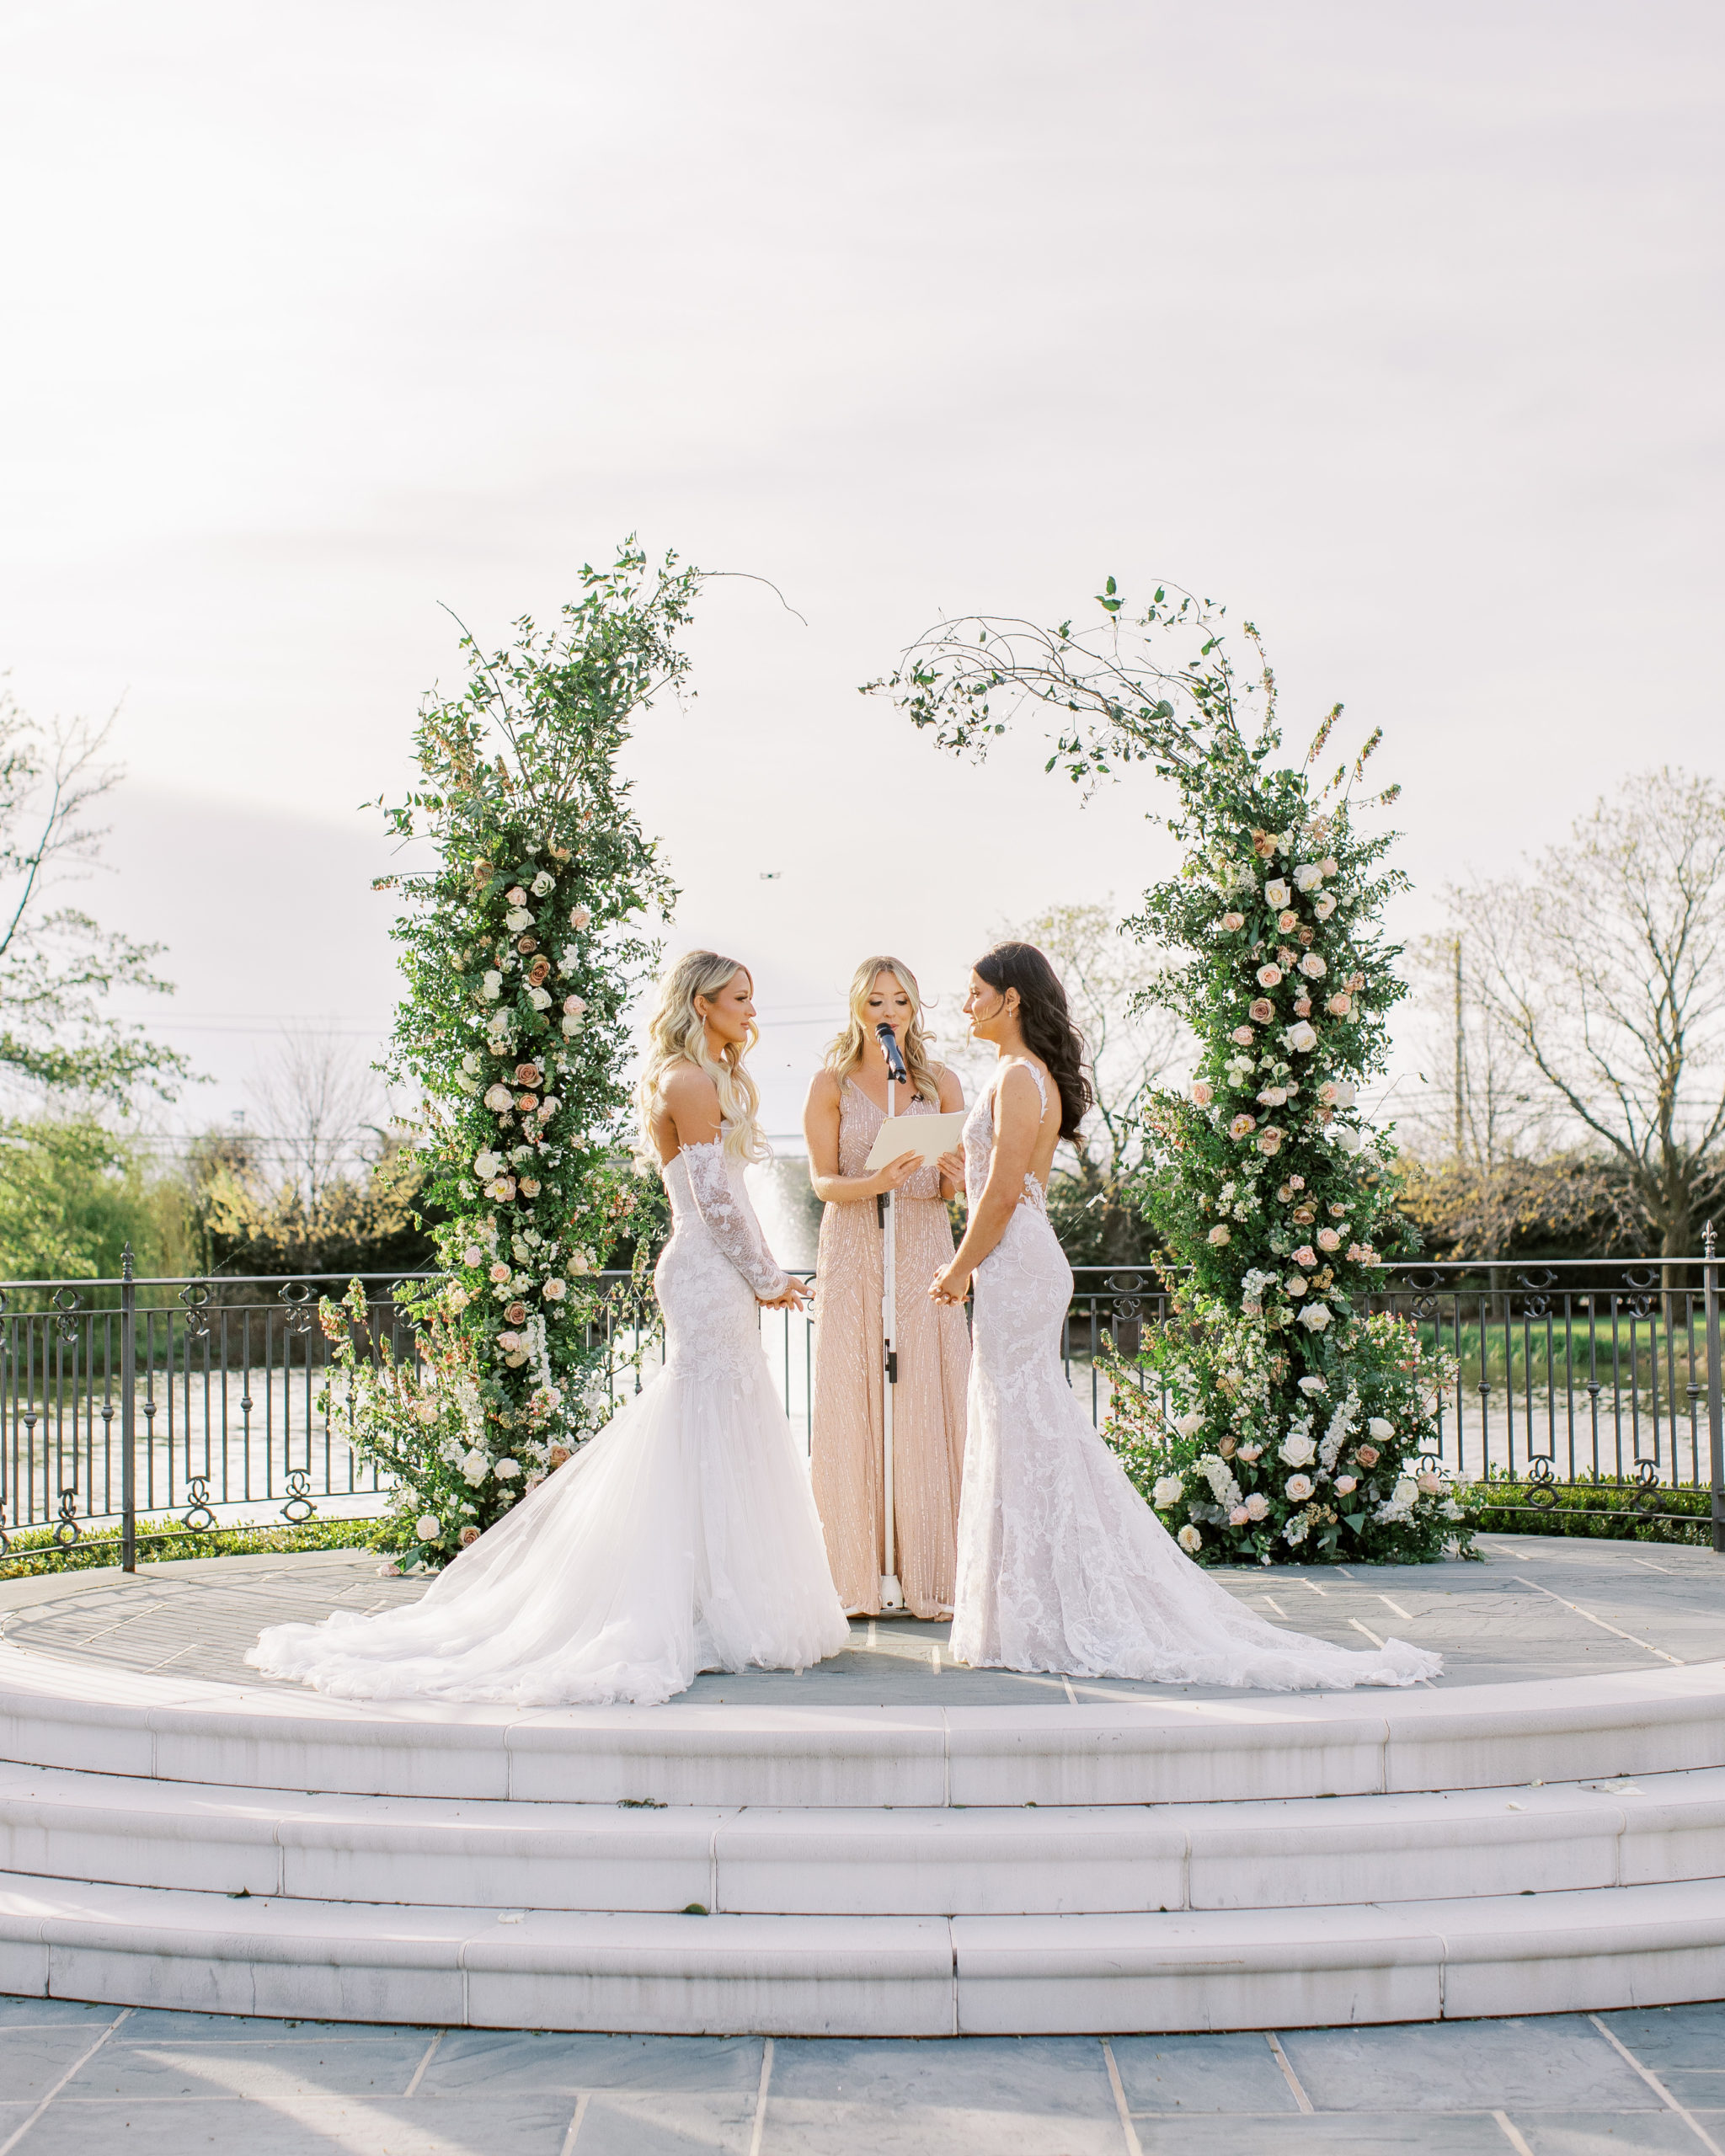 Brides under white and peach rose arch at wedding ceremony for a Romantic Park Chateau Wedding Photography